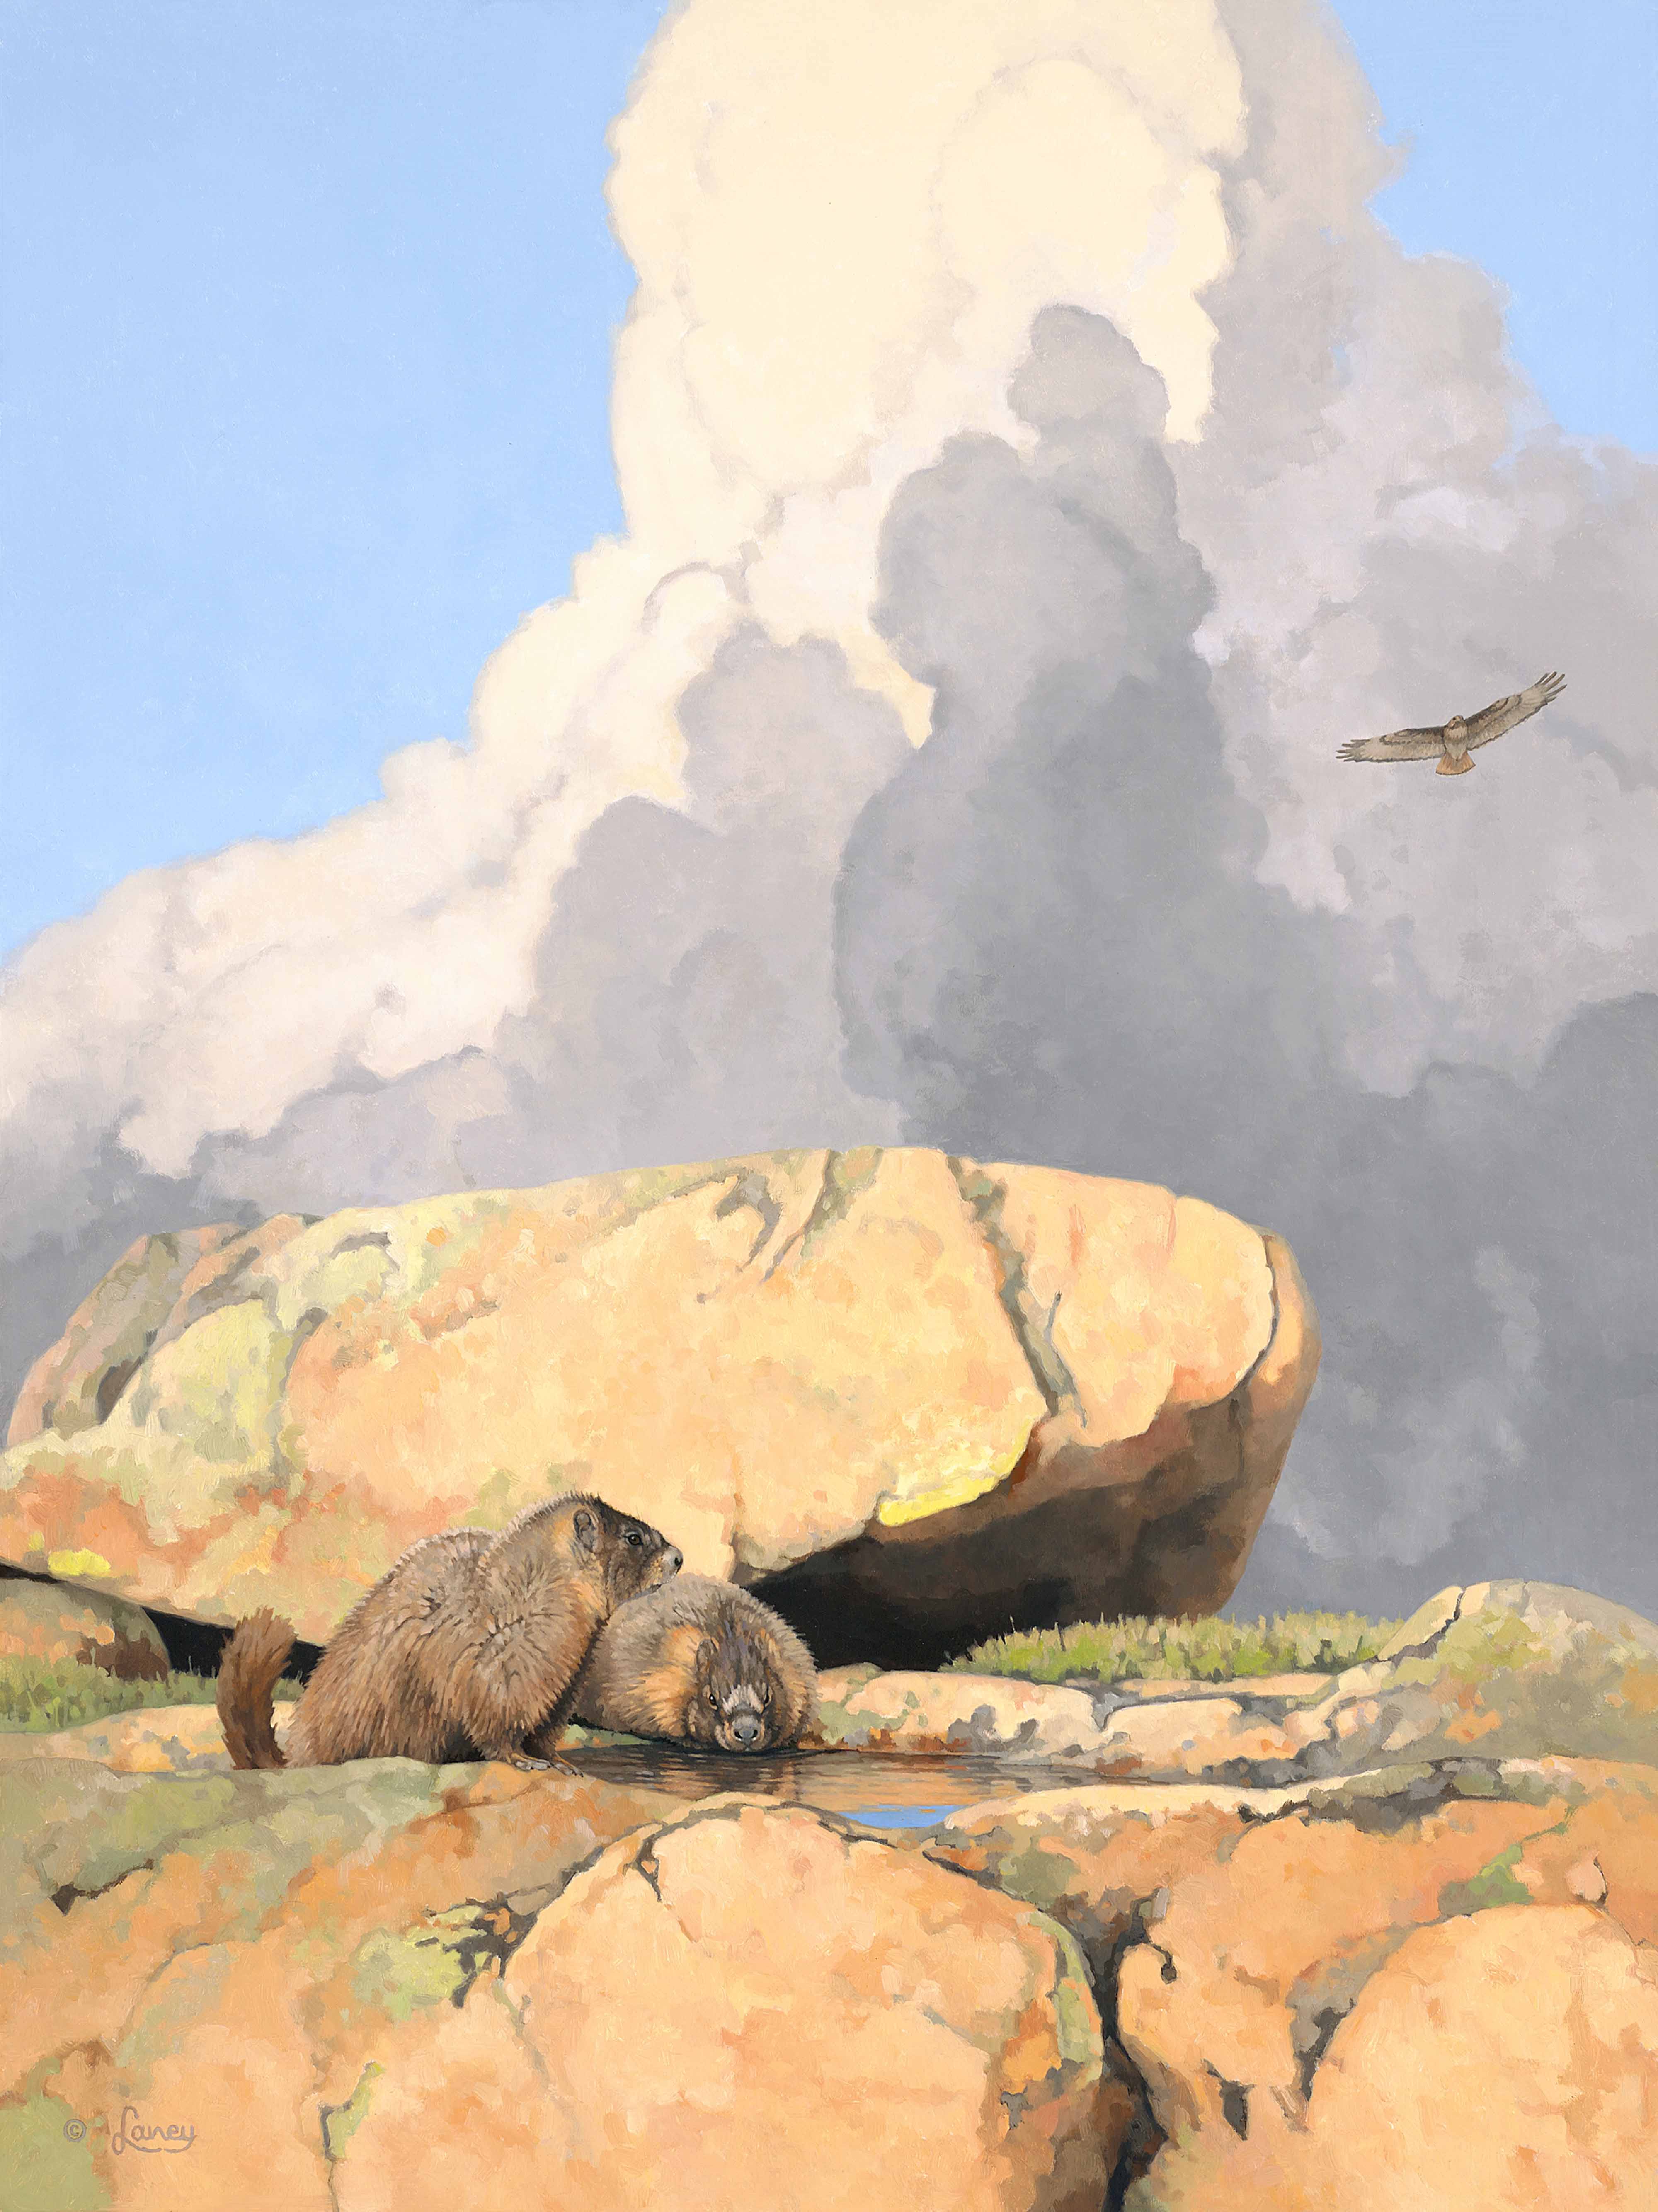 Laney, ‘Alpine Rainwater,’ 2012. Oil on gesso board, 24 by 18in. Image courtesy of the National Museum of Wildlife Art